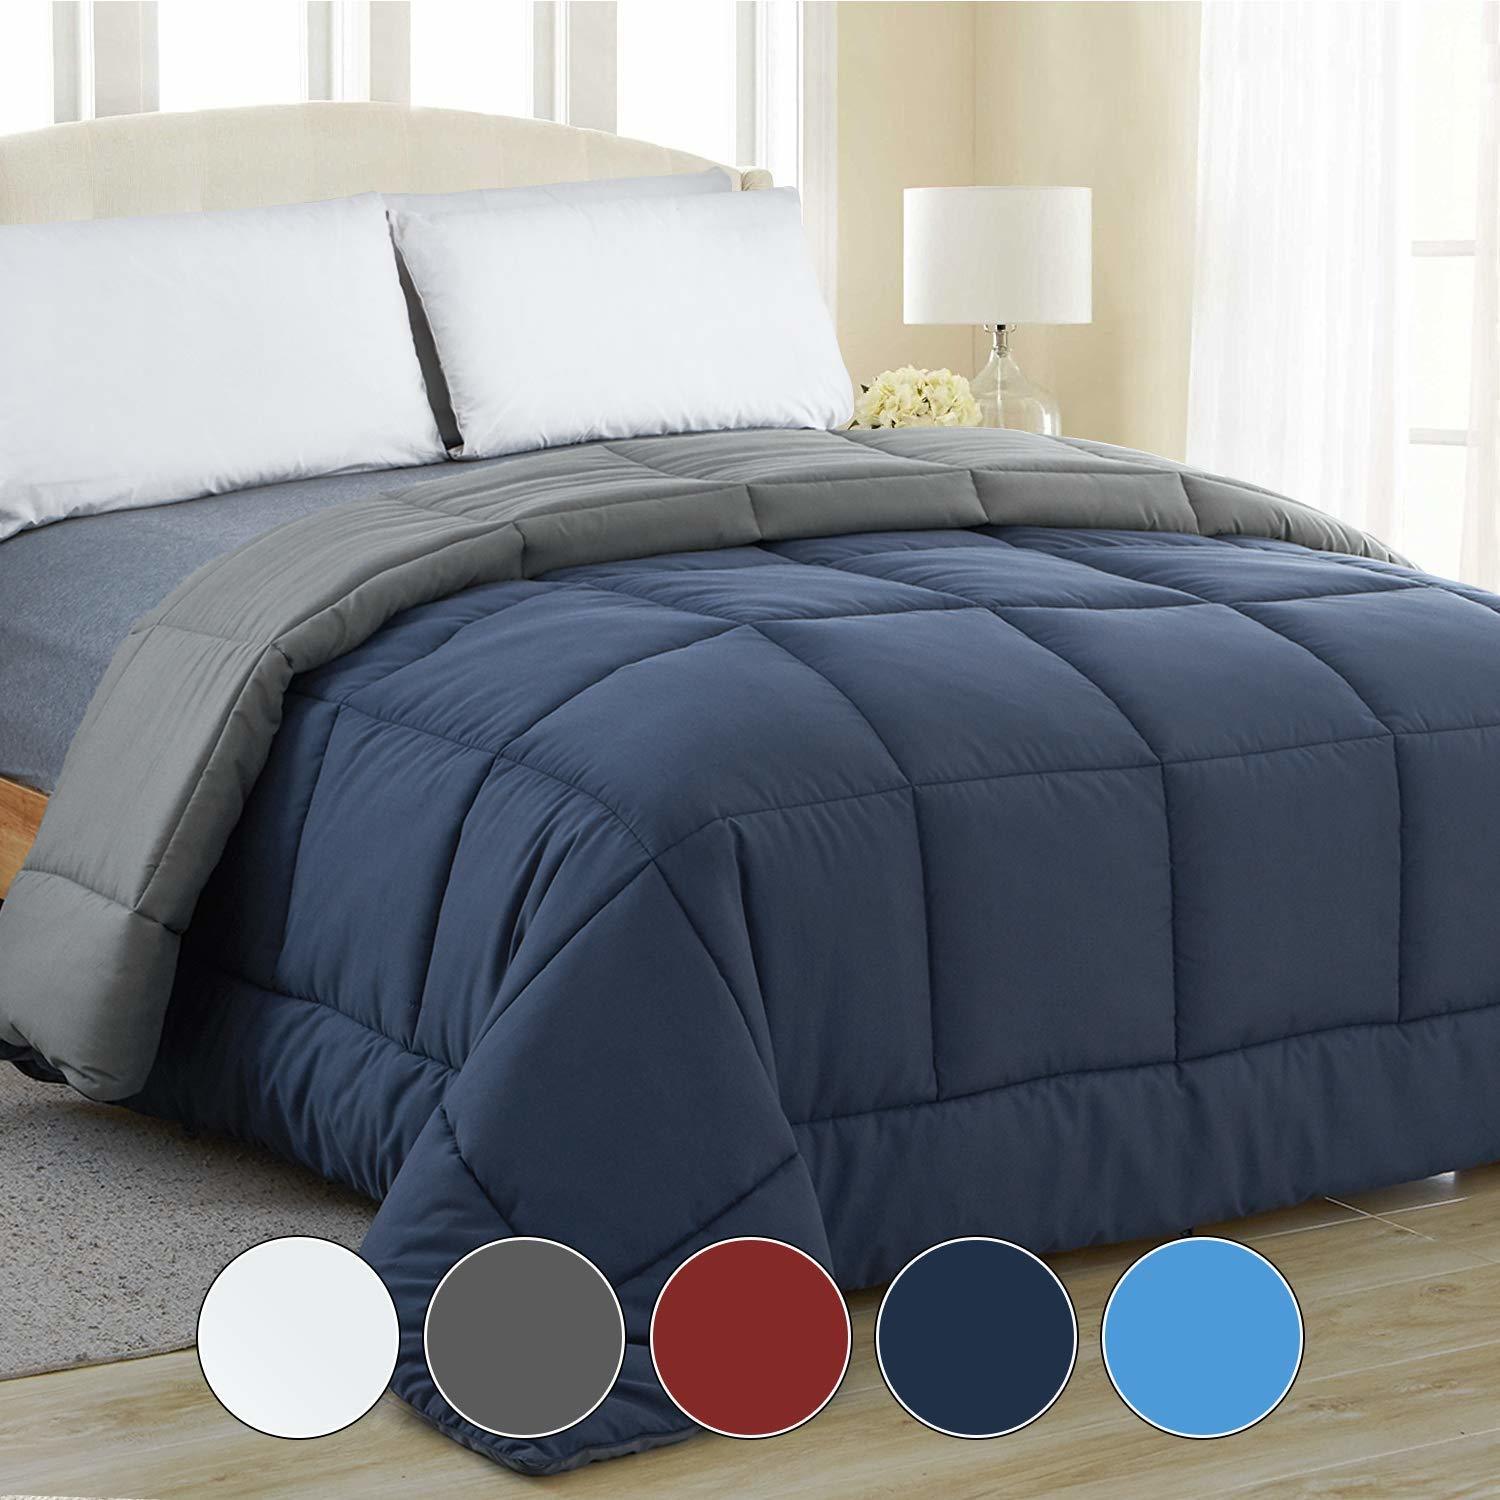 Best Down Alternative Comforters In 2020 Review On The Top 6 Picks